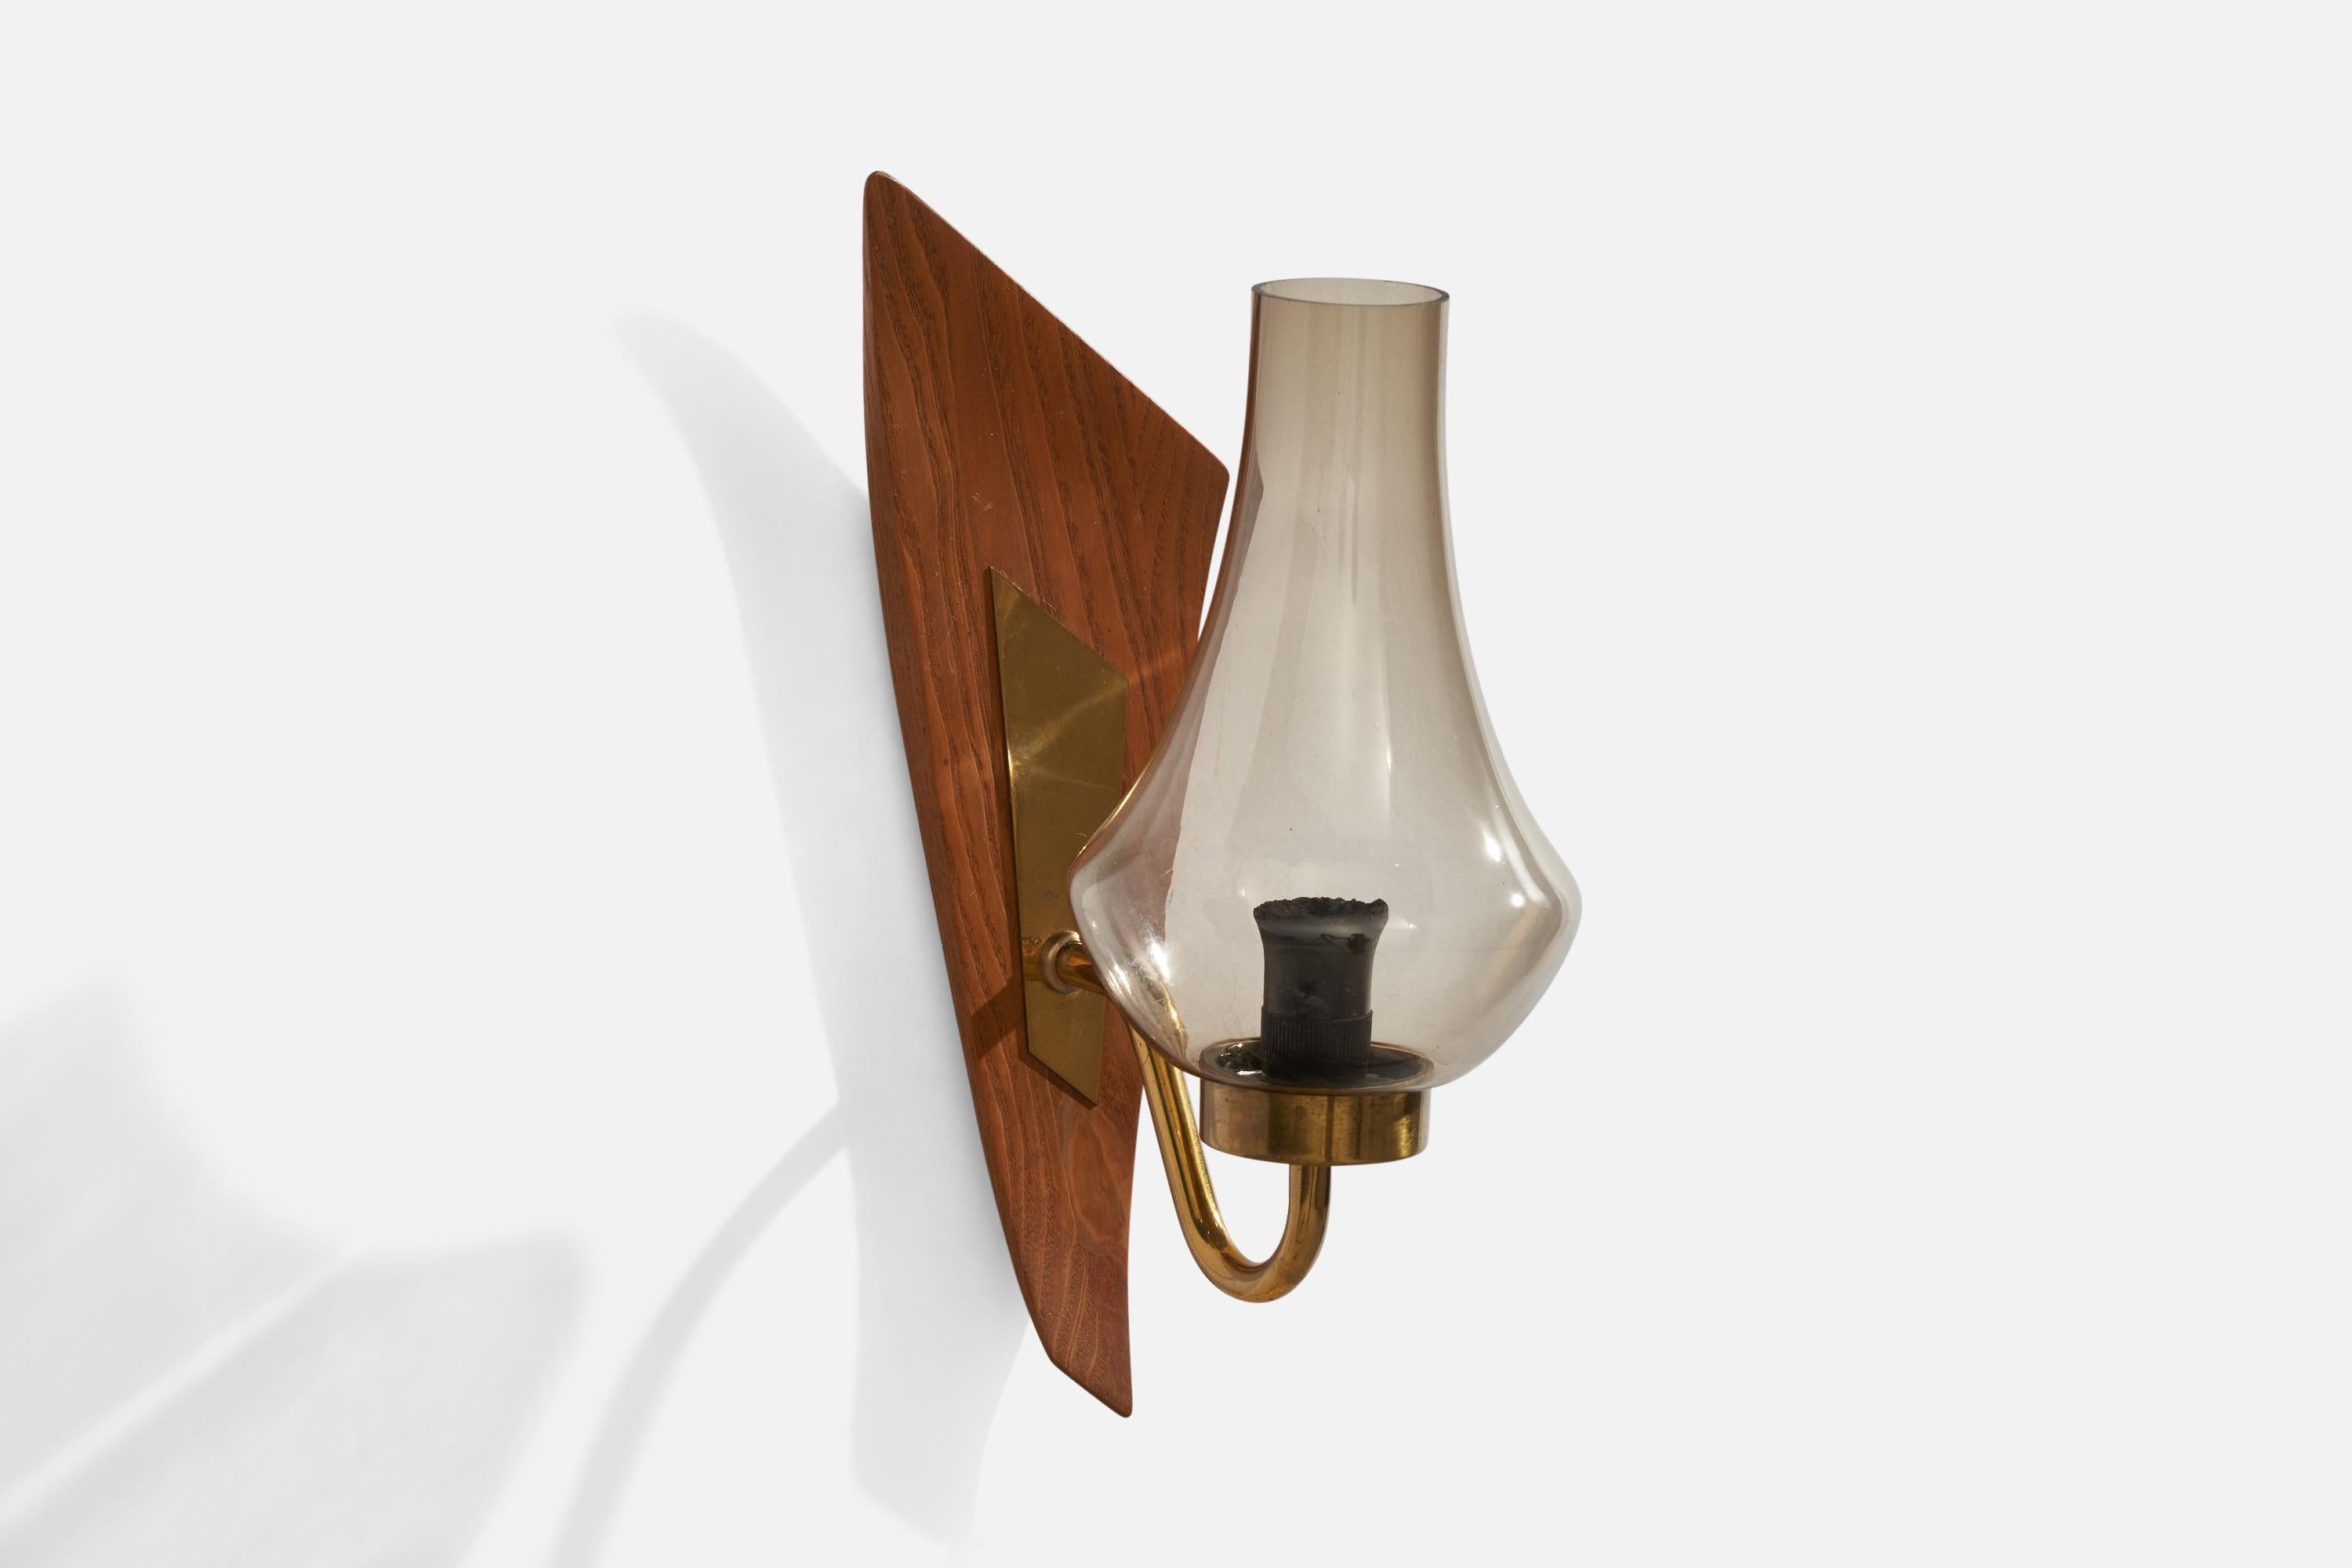 A brass, teak and smoked glass wall light designed and produced in Sweden, 1950s.

Overall Dimensions (inches): 11.25” H x 3.75”  W x 6” D
Back Plate Dimensions (inches): n/a
Bulb Specifications: E-14 Bulb
Number of Sockets: 1
All lighting will be